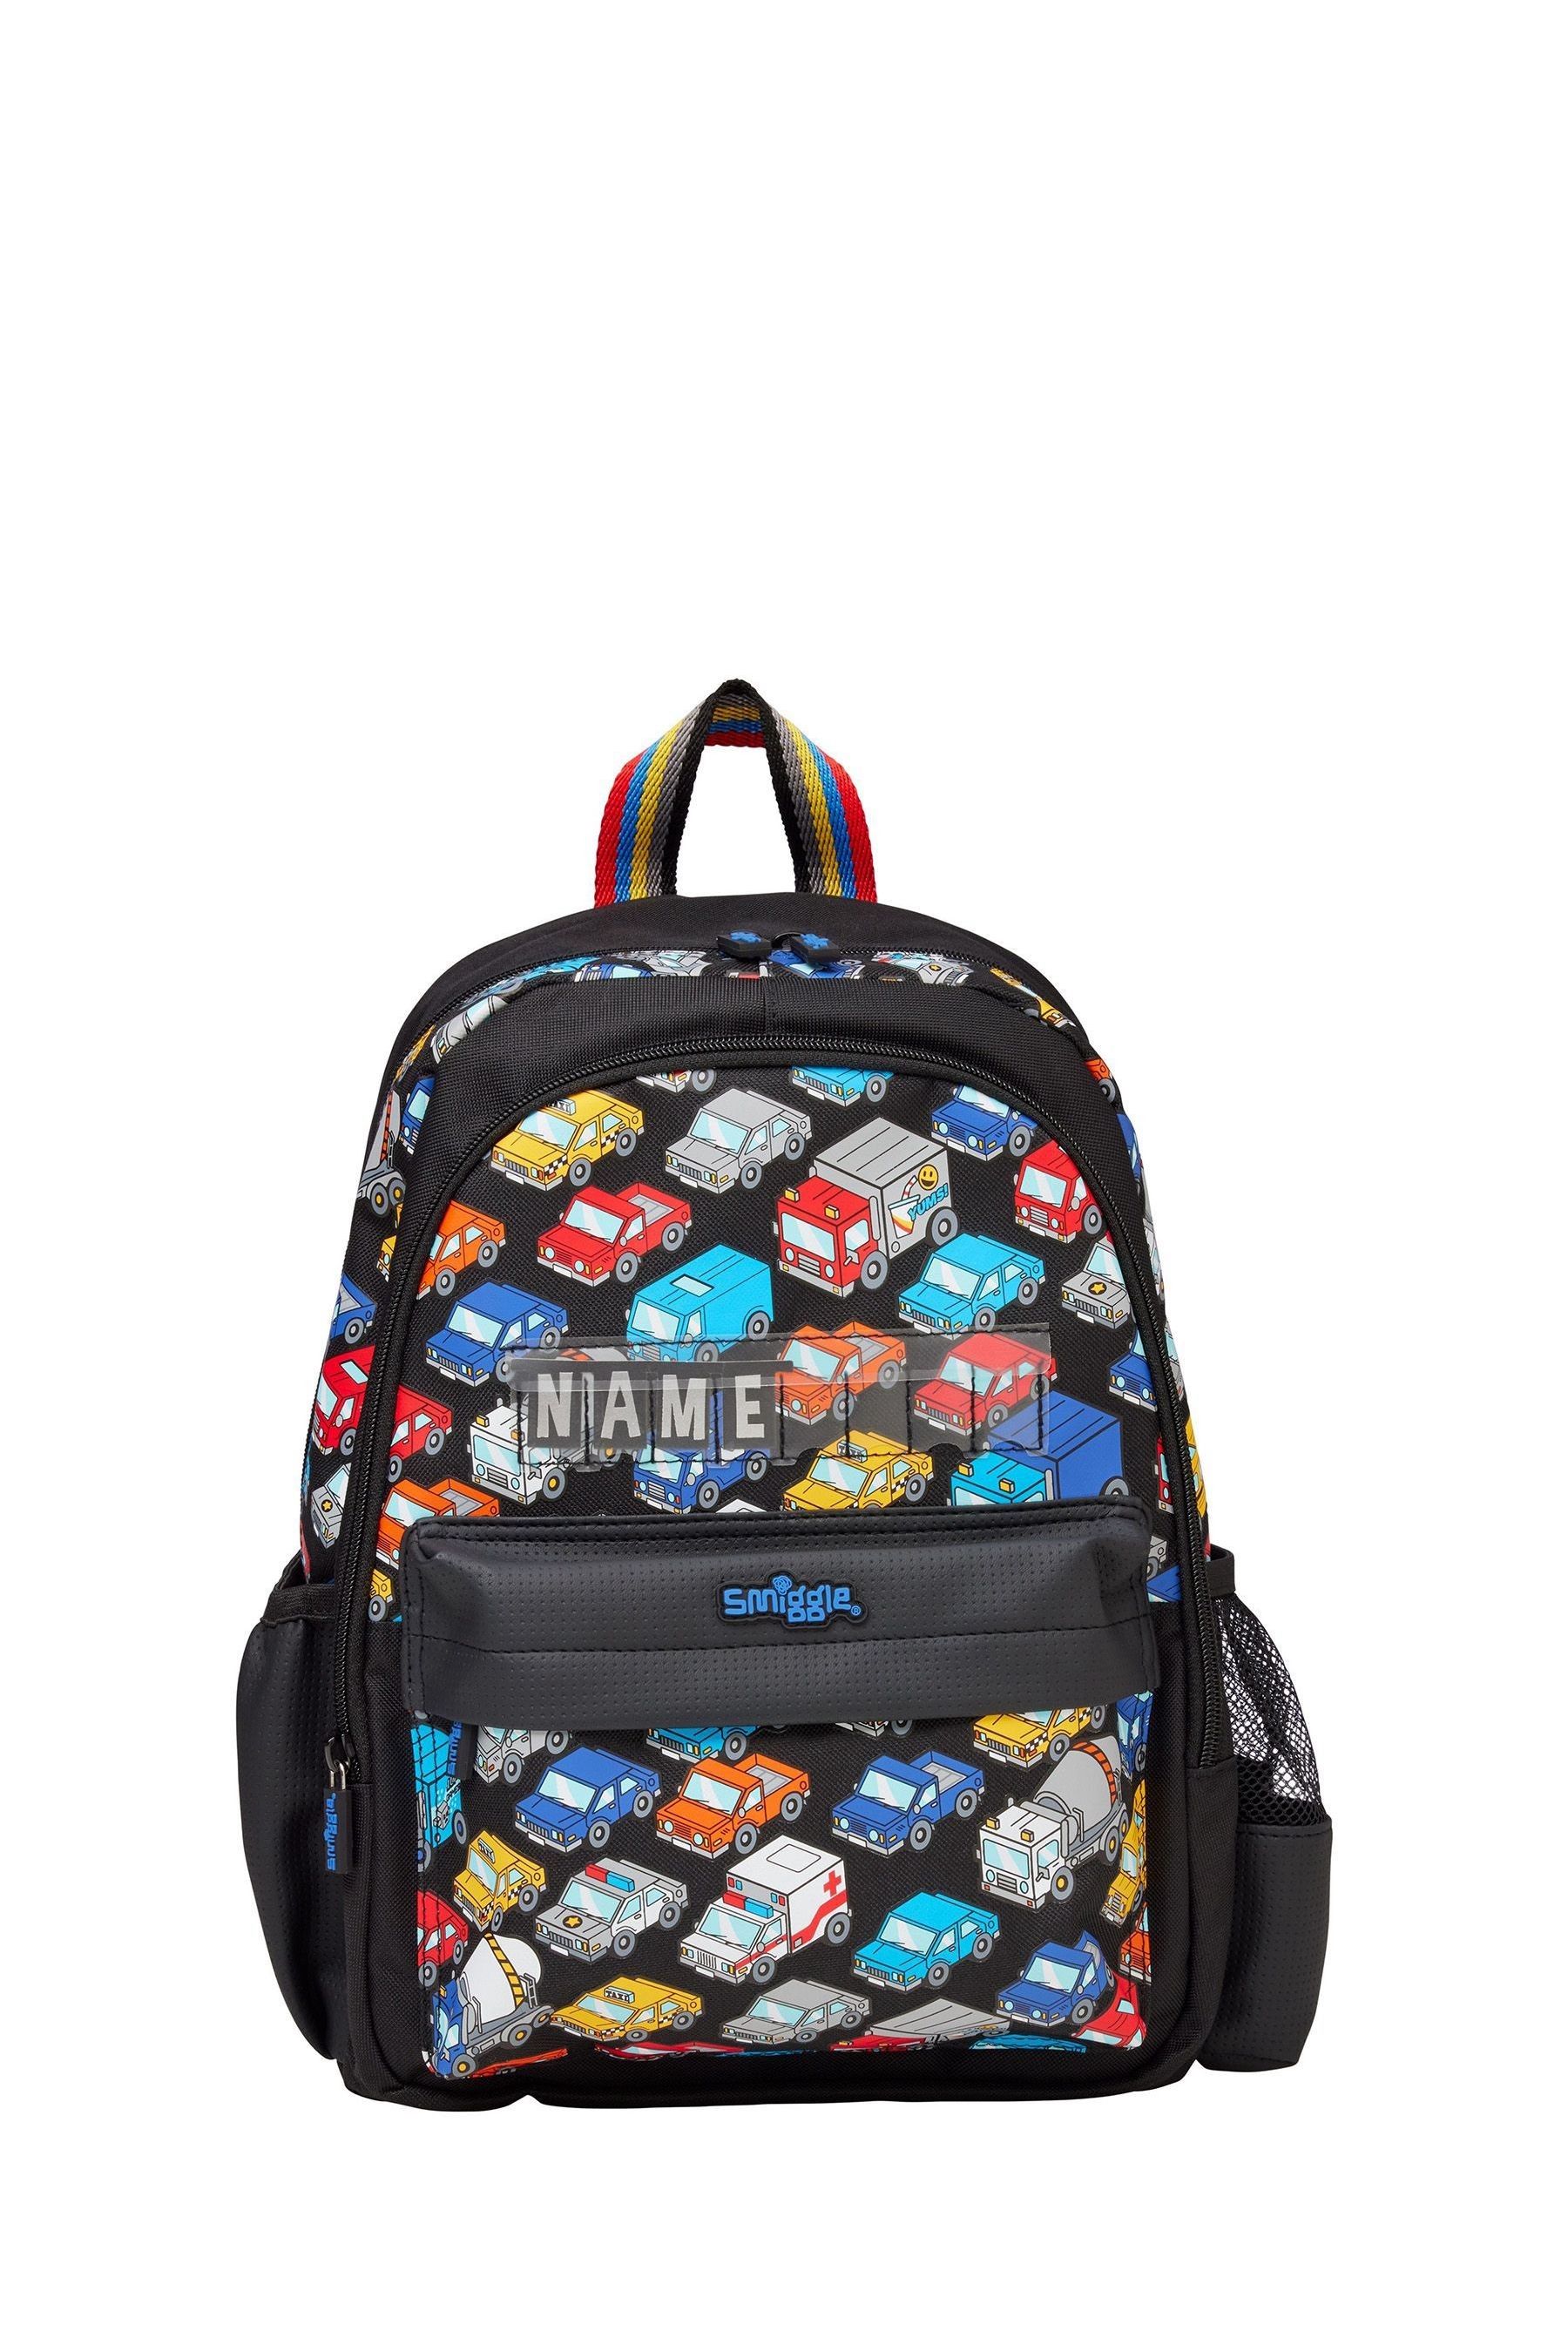 Buy Smiggle Black Movin' Junior ID Backpack from the Next UK online shop